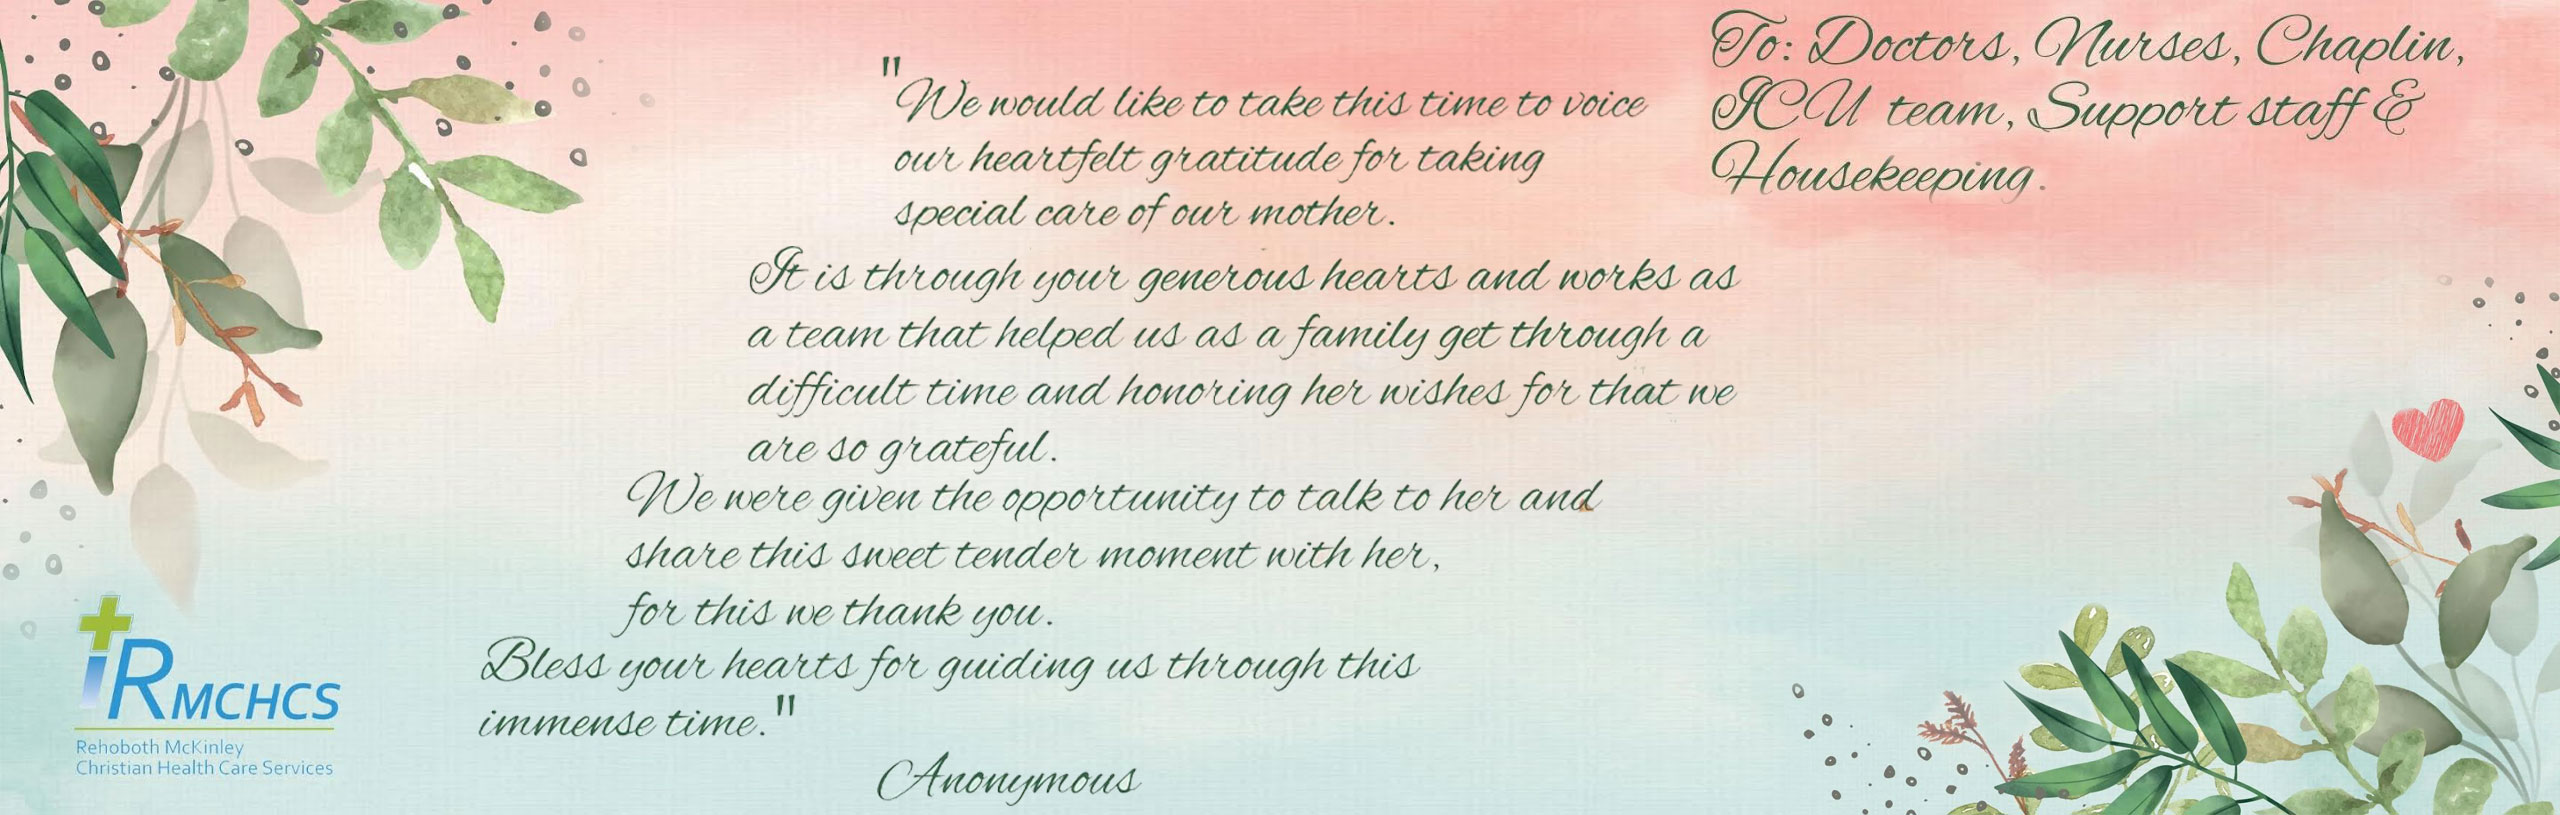 "We would like to take this time to voice our heartfelt gratitude for taking special care of our mother. It is through your generous hearts and works as a team that helped us as a family get through a difficult time and honoring her wishes for that we are so grateful. We were given the opportunity to talk to her and share this sweet tender moment with her, for this we thank you."

Bless your hearts for guiding us through this immense time."

-Anonymous

RMCHCS
Rehoboth Mckinley Christian Health Care Services